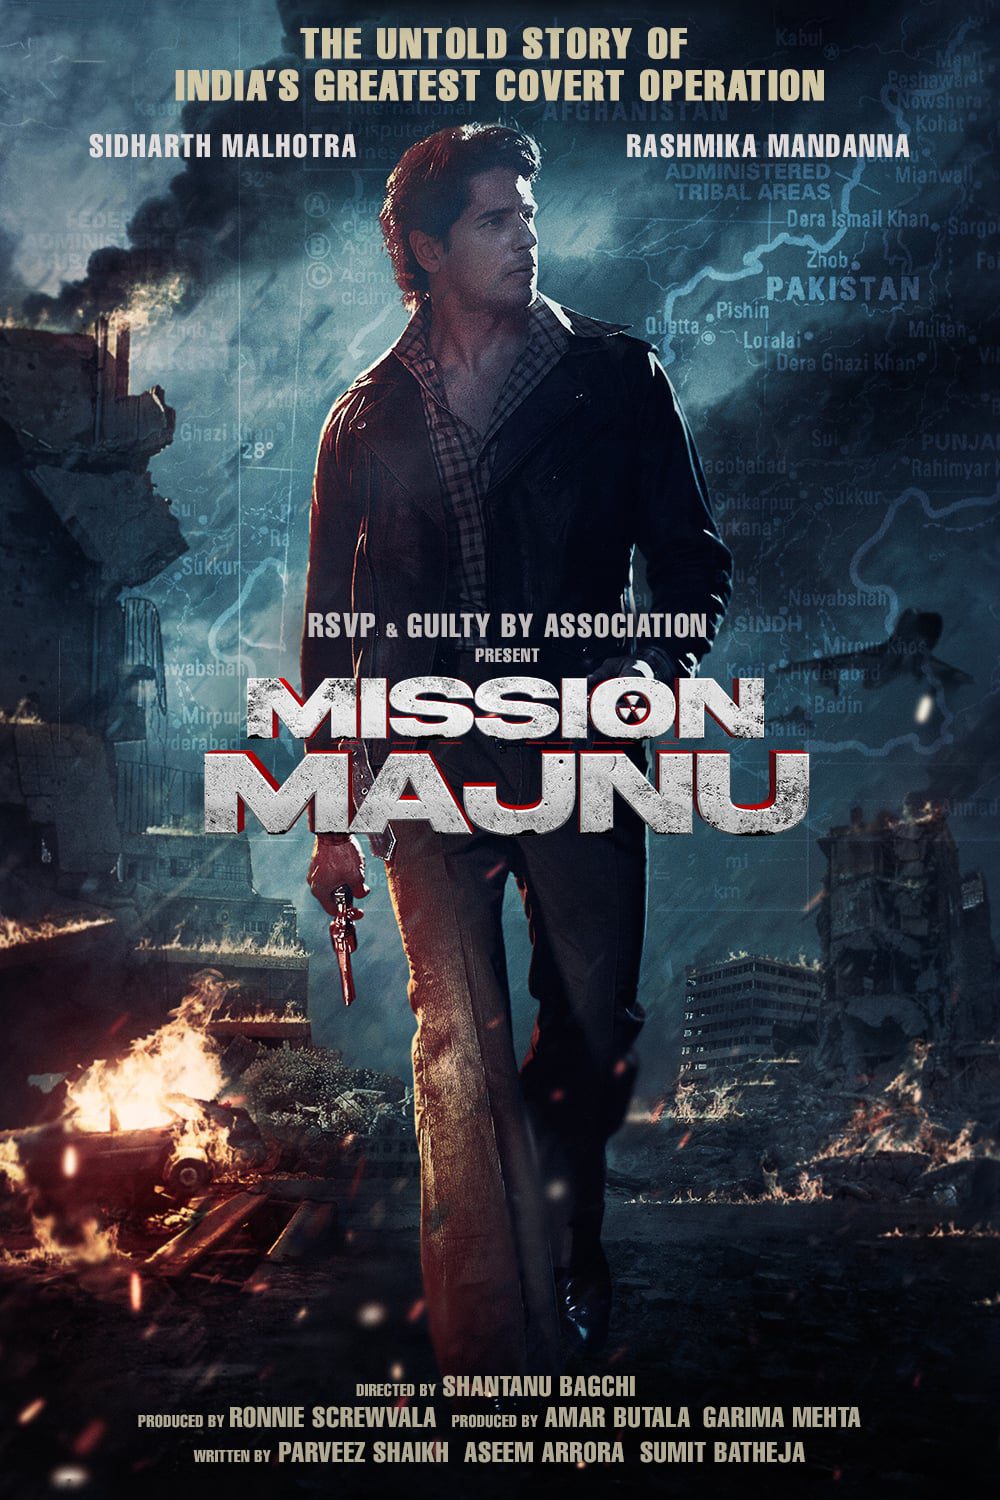 Poster for the movie "Mission Majnu"